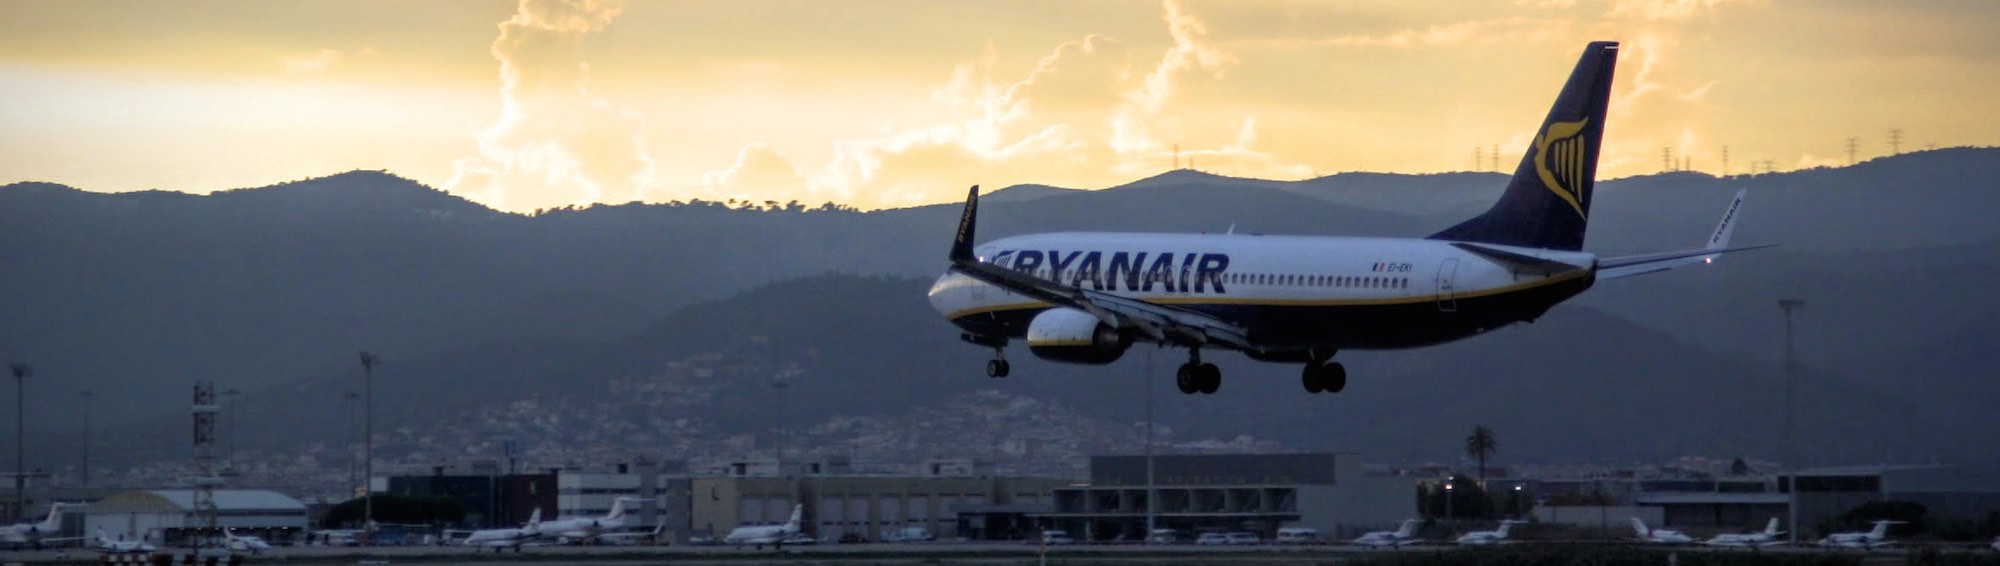 Best time to book flights for Dublin (DUB) to Bodrum (BJV) flights with Ryanair at AirHint